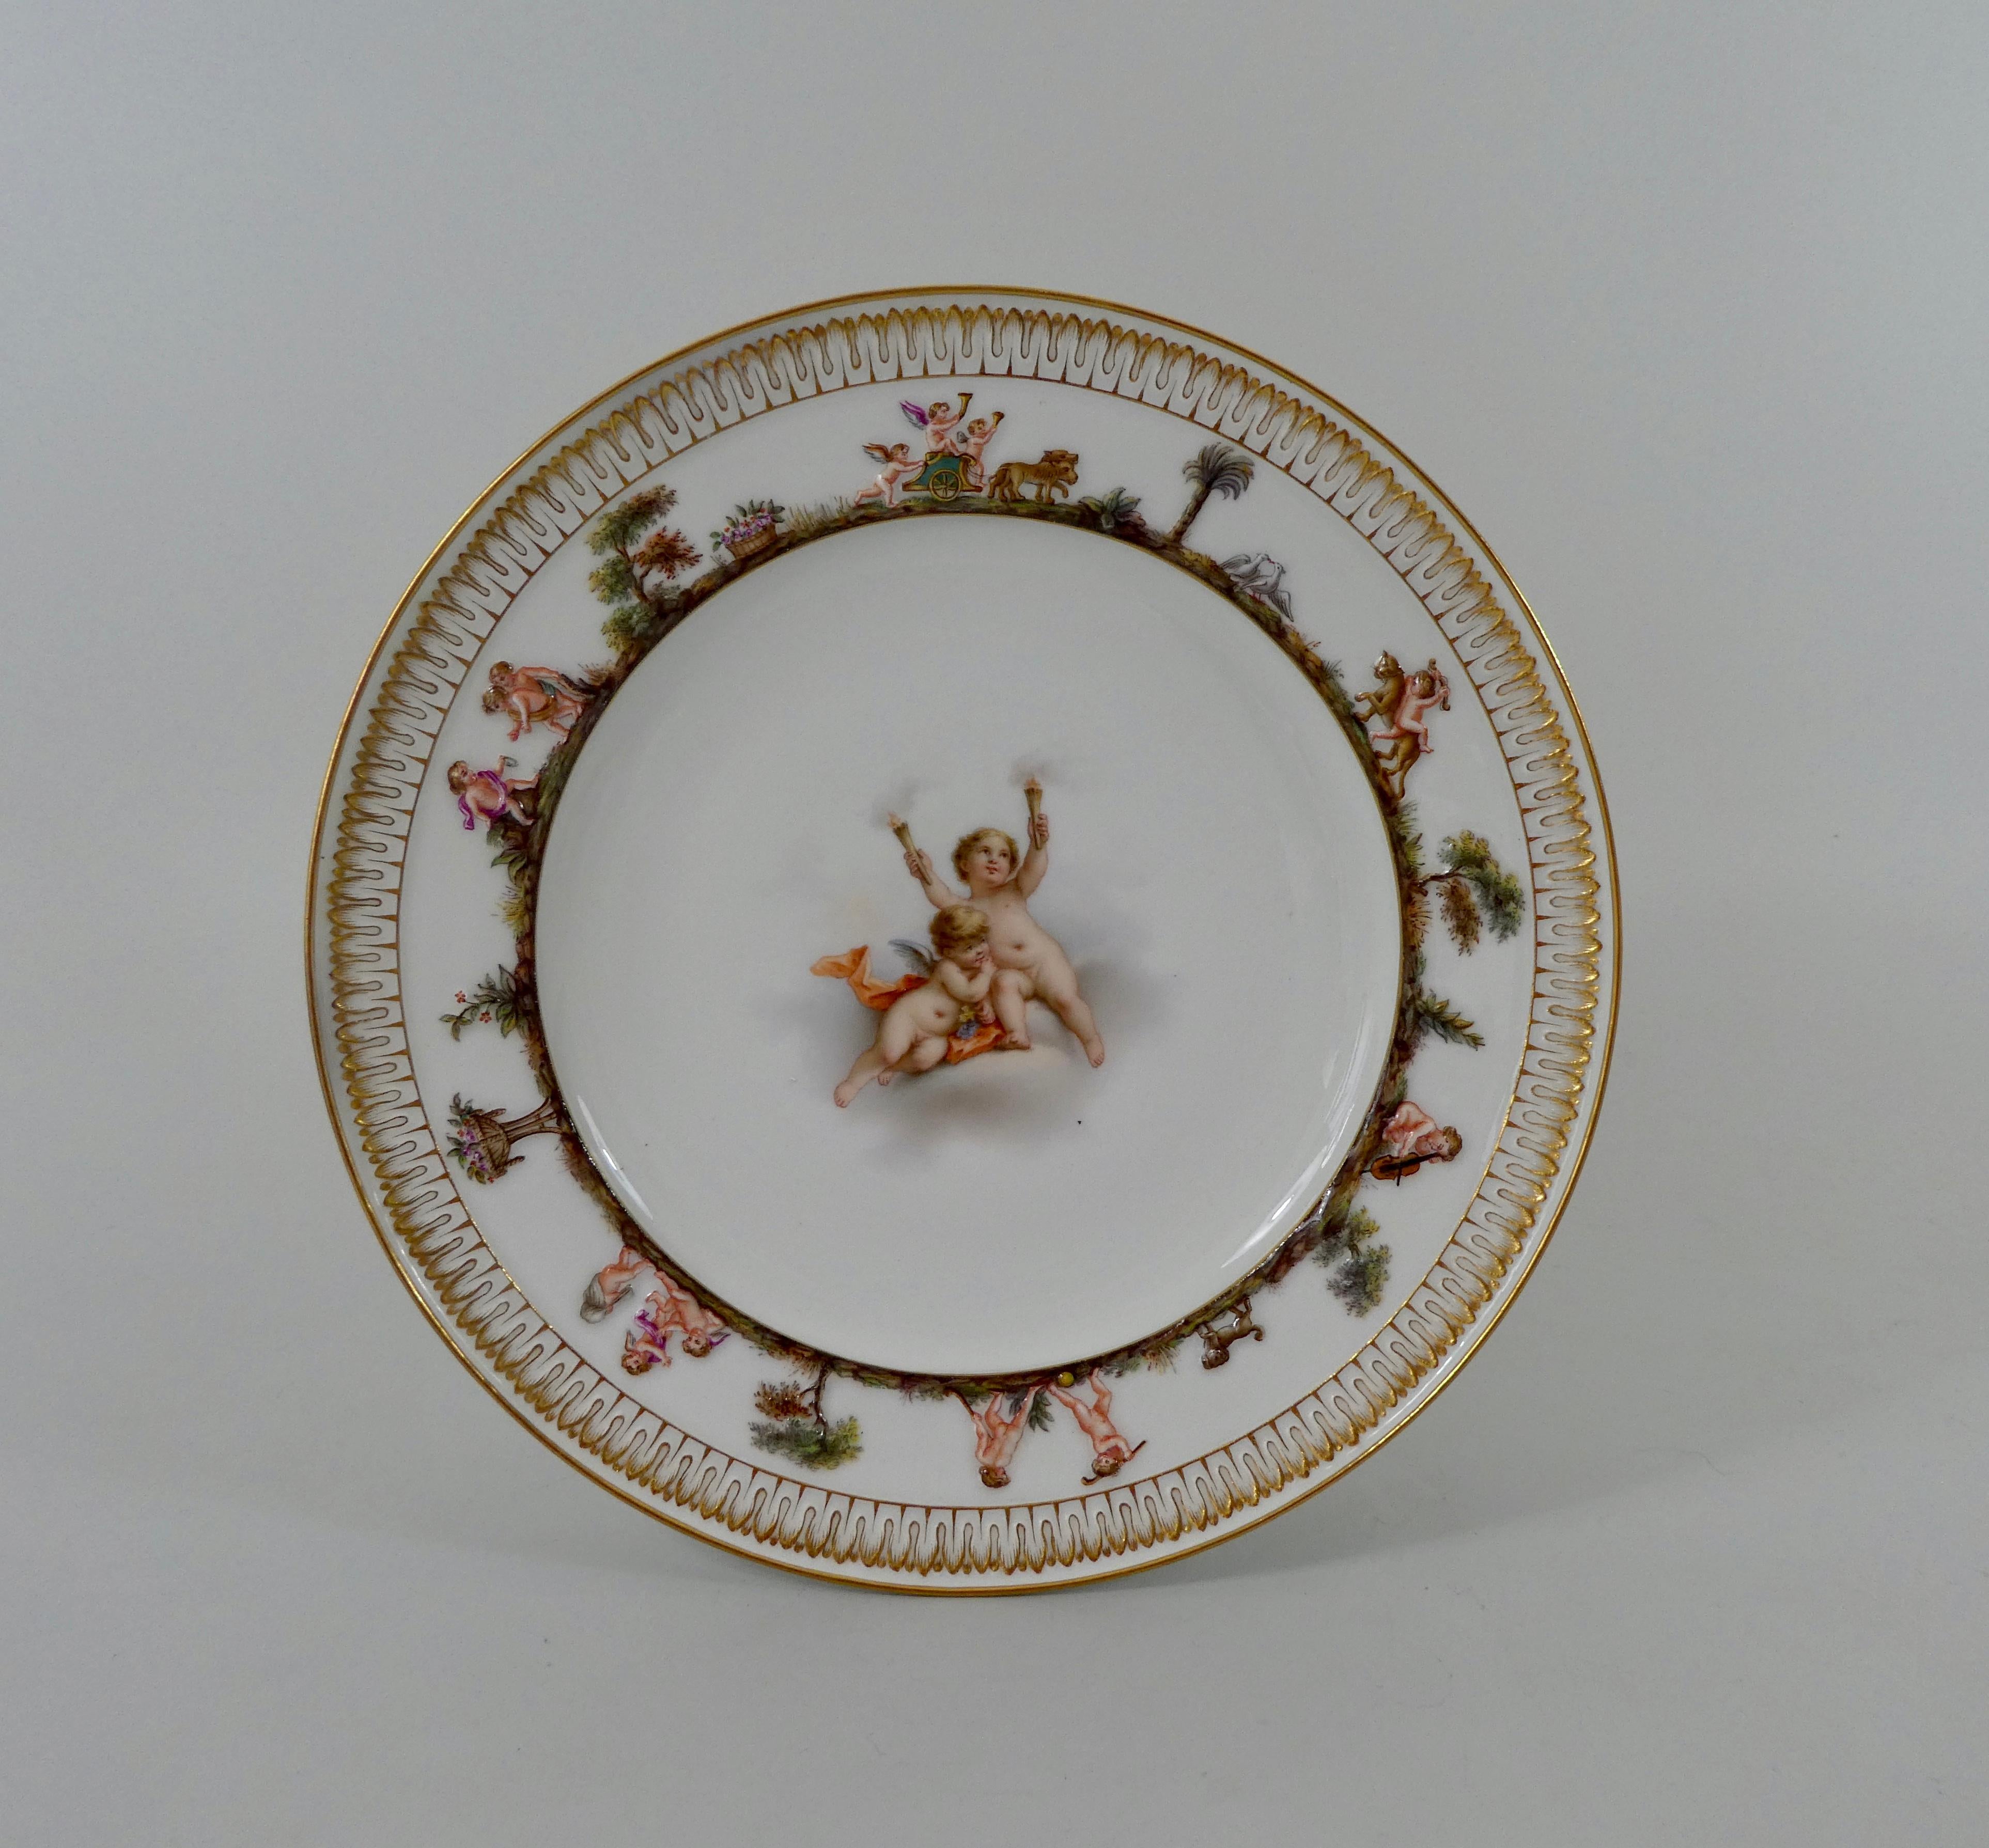 A fine Meissen porcelain plate, circa 1870. Beautifully hand painted to the centre, with a scene of two Putti, amongst clouds. One Putti carrying flaming torches, the second holding a bunch of grapes. The border moulded and painted in Capo di Monte